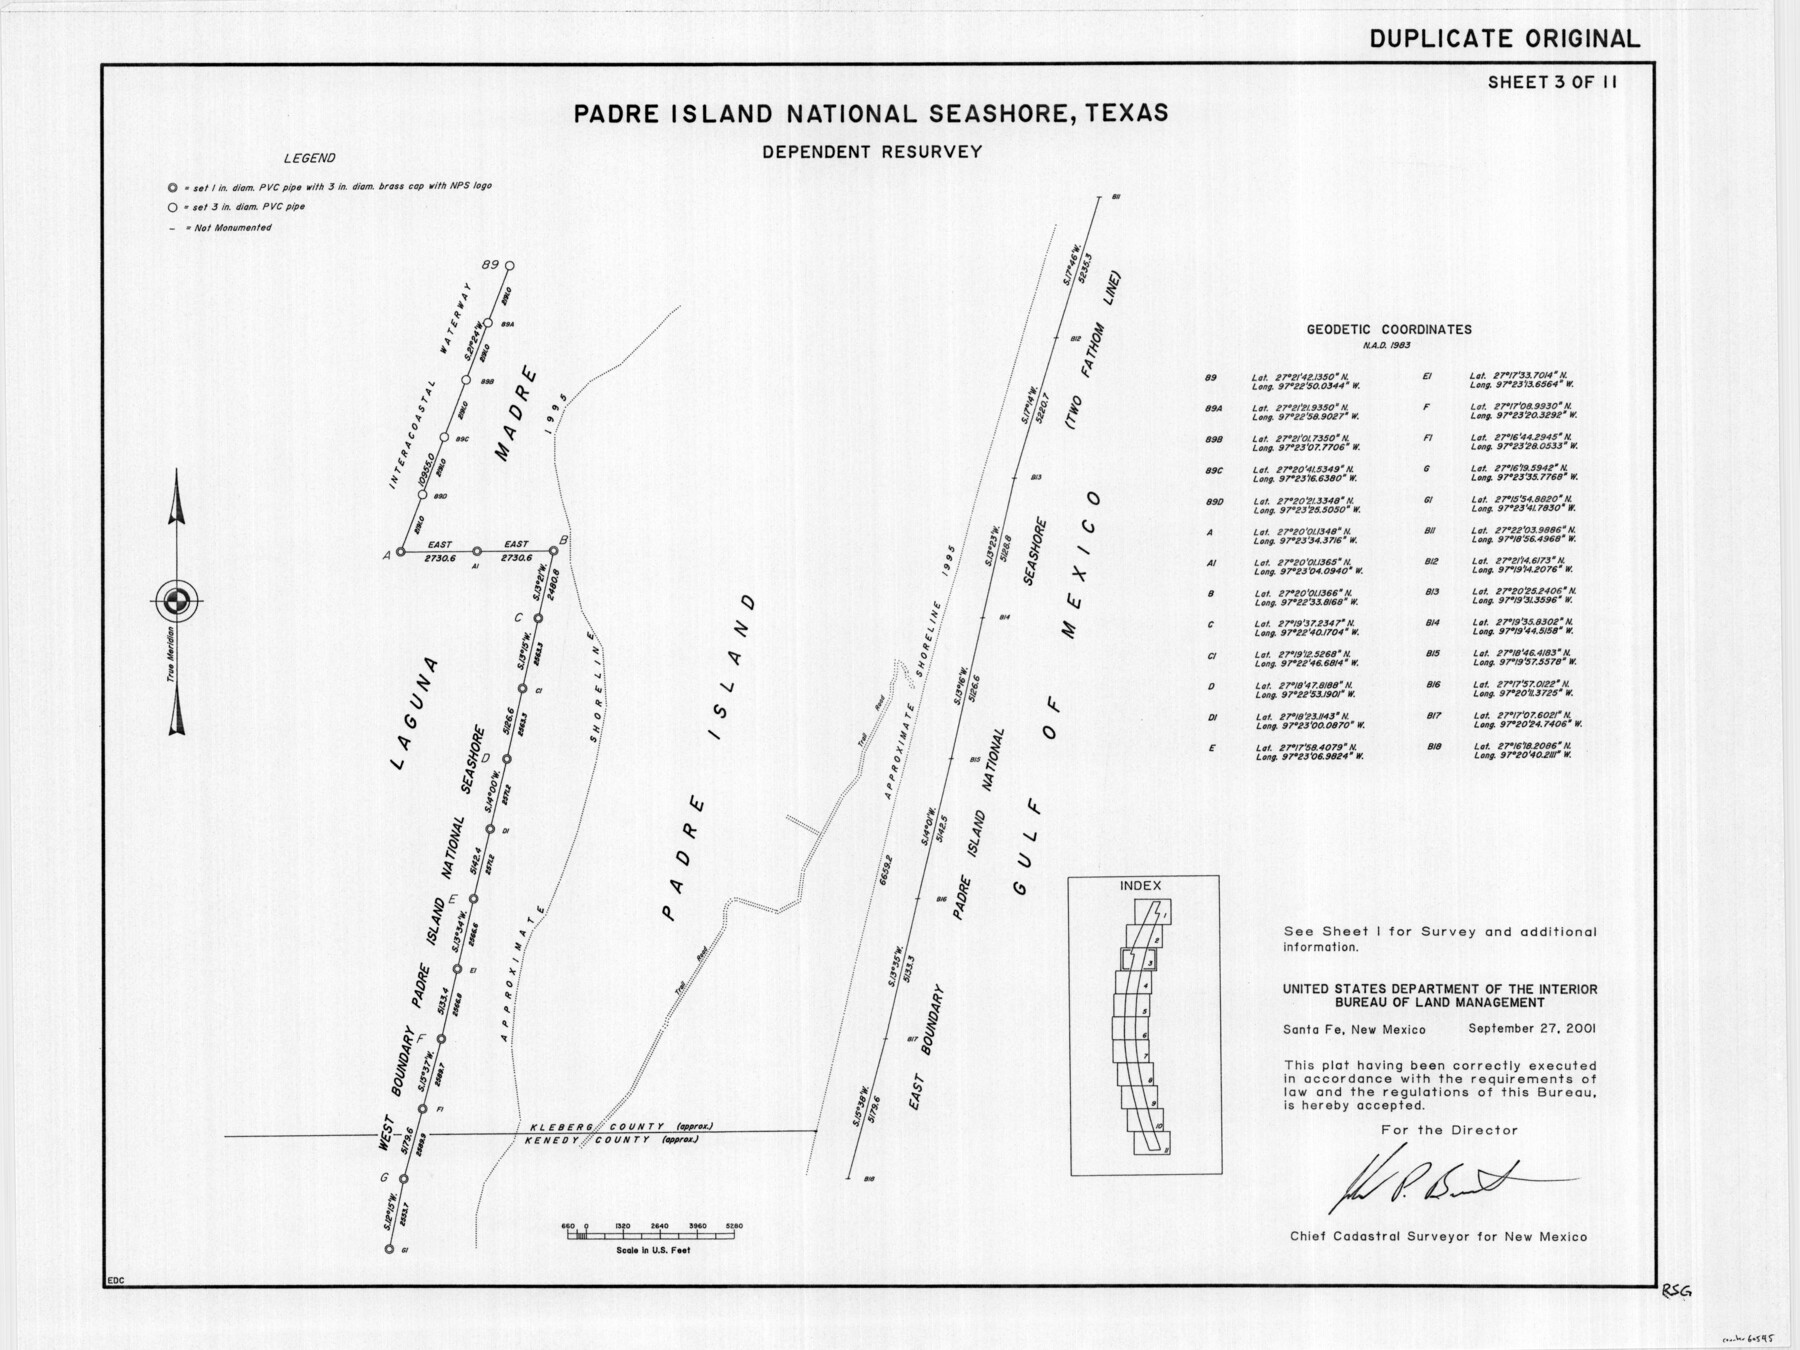 60545, Padre Island National Seashore, Texas - Dependent Resurvey, General Map Collection